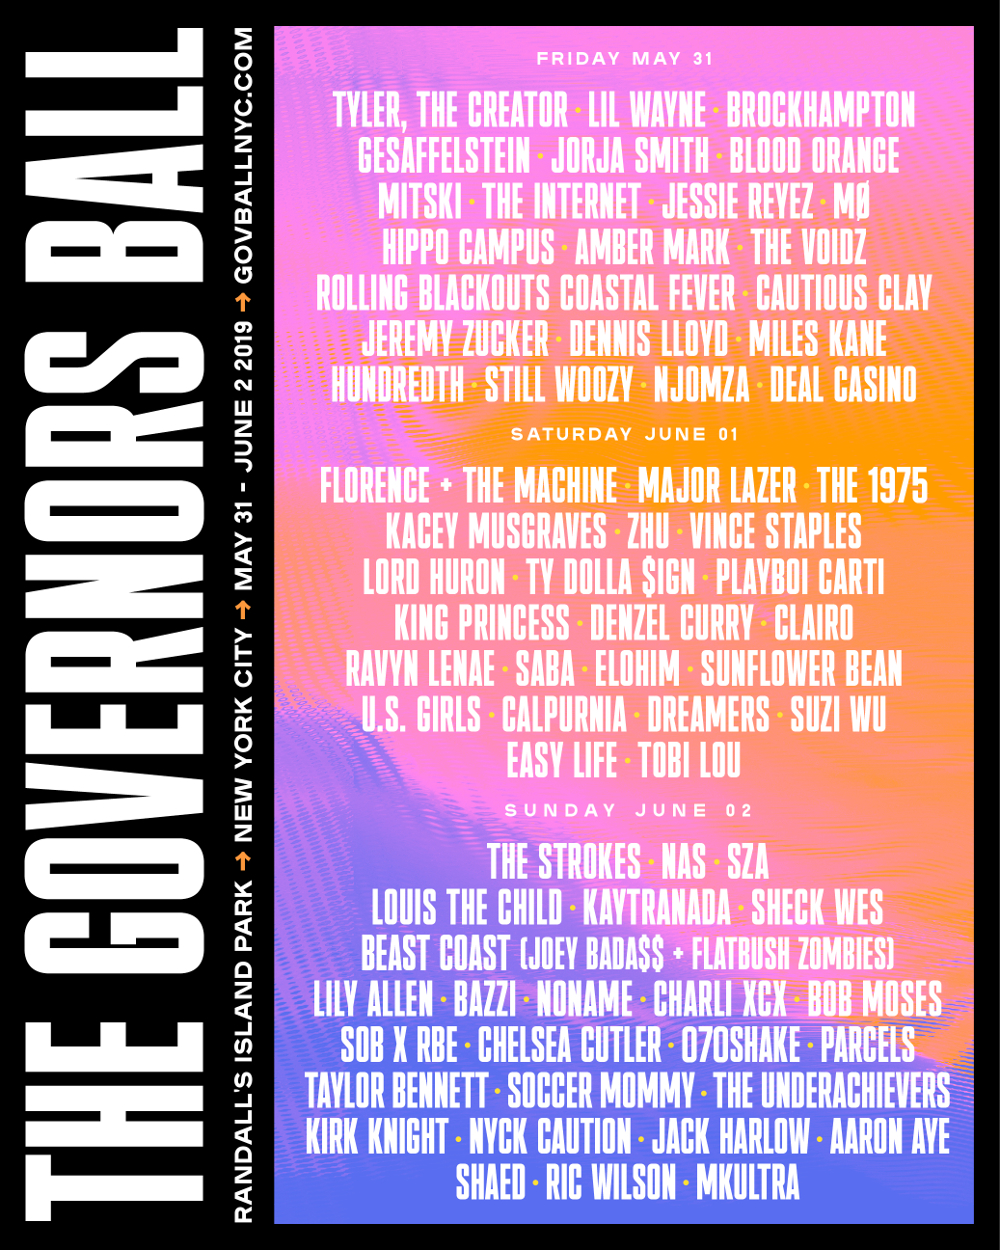 The Governors Ball 2019 Lineup Poster